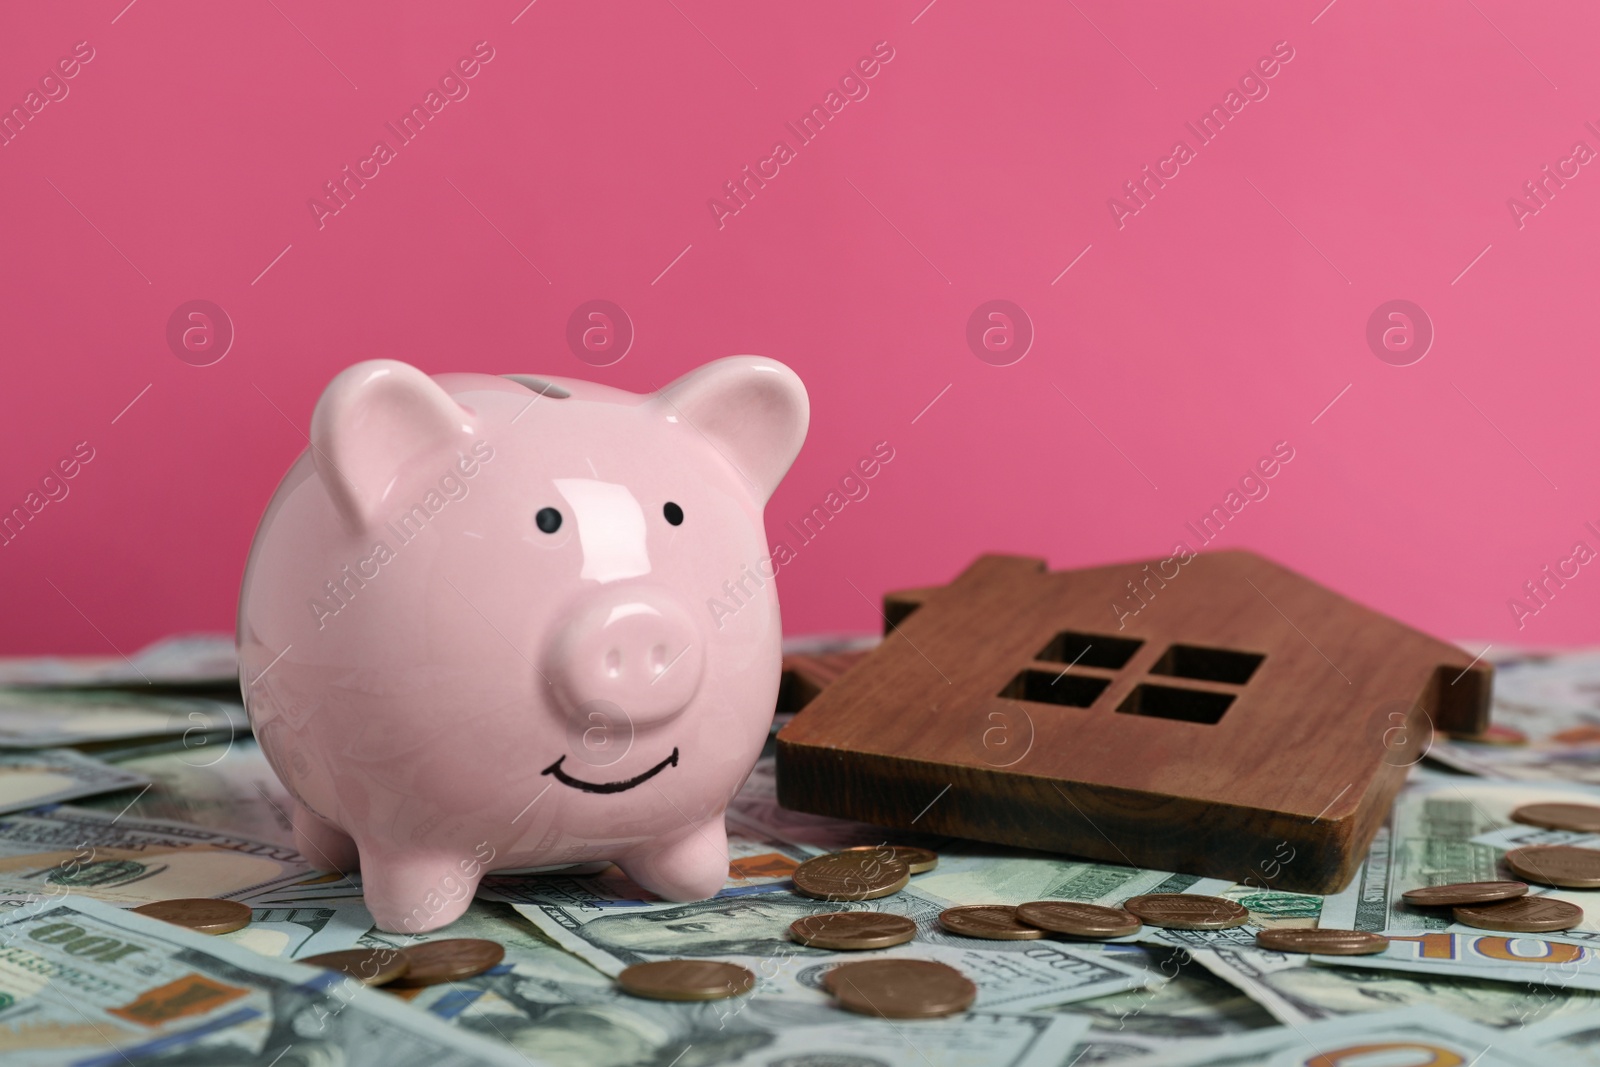 Photo of Piggy bank, house model and money against pink background